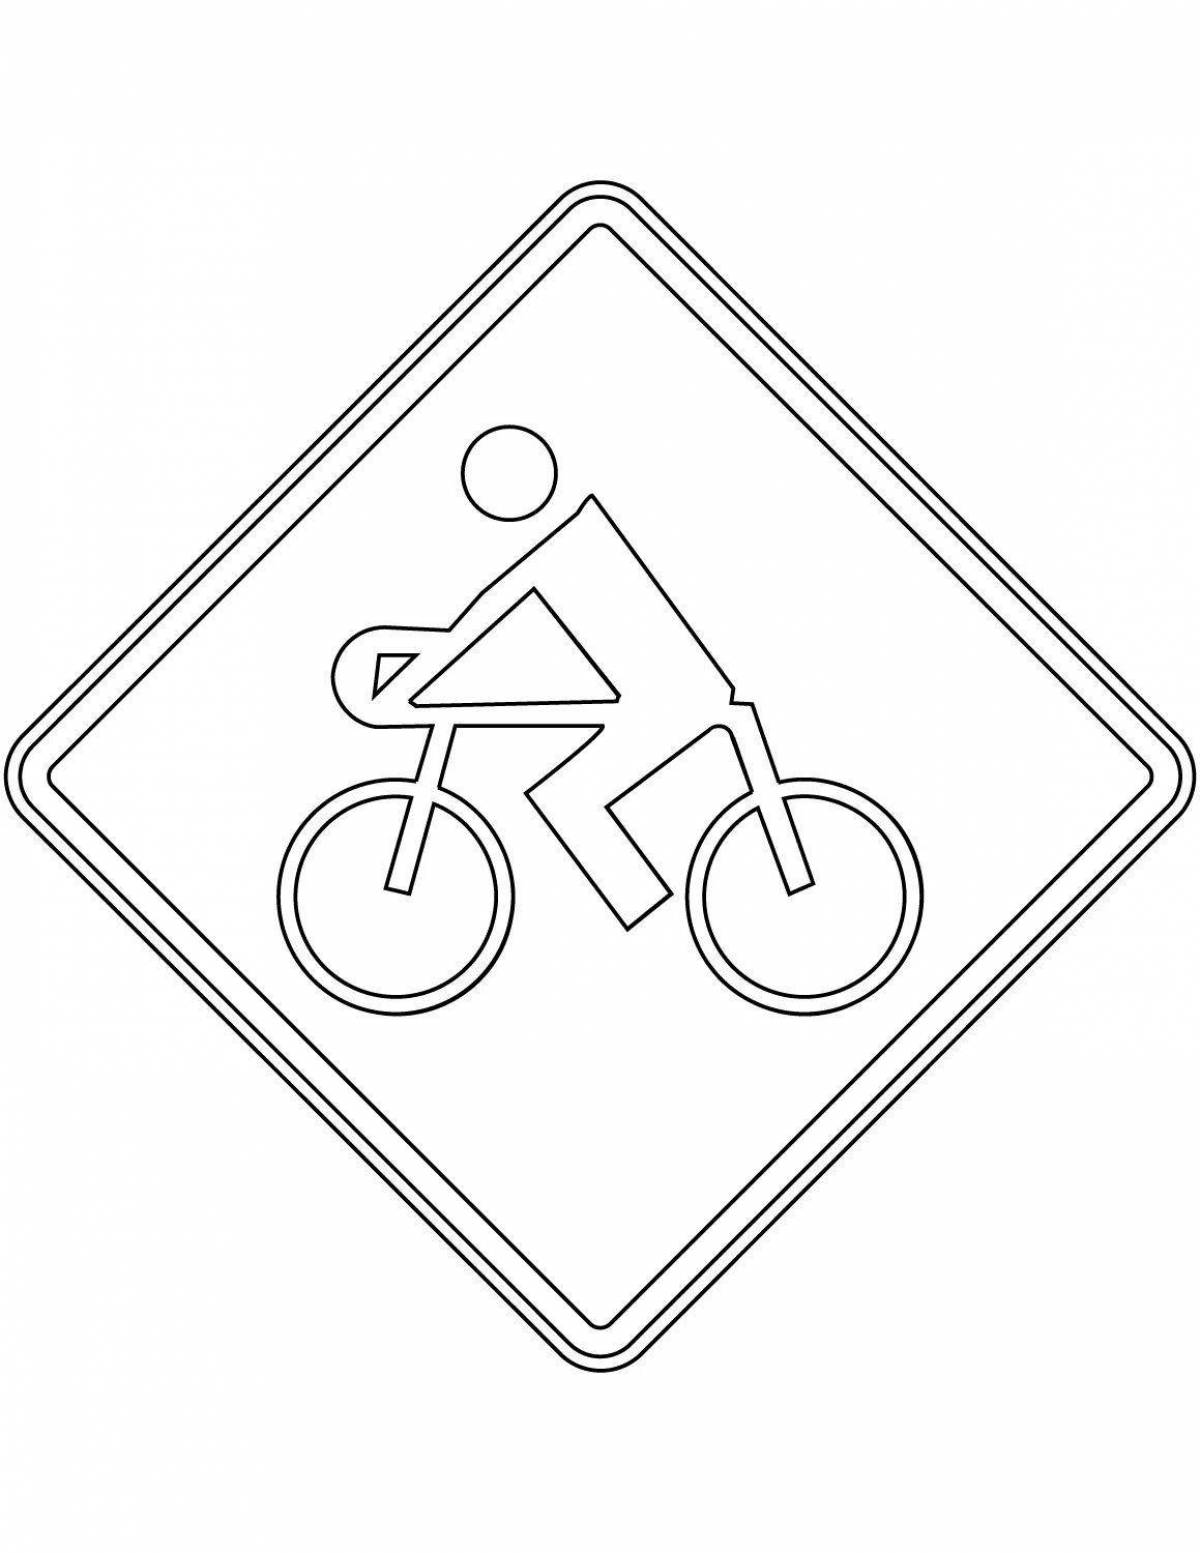 Coloring page road sign 